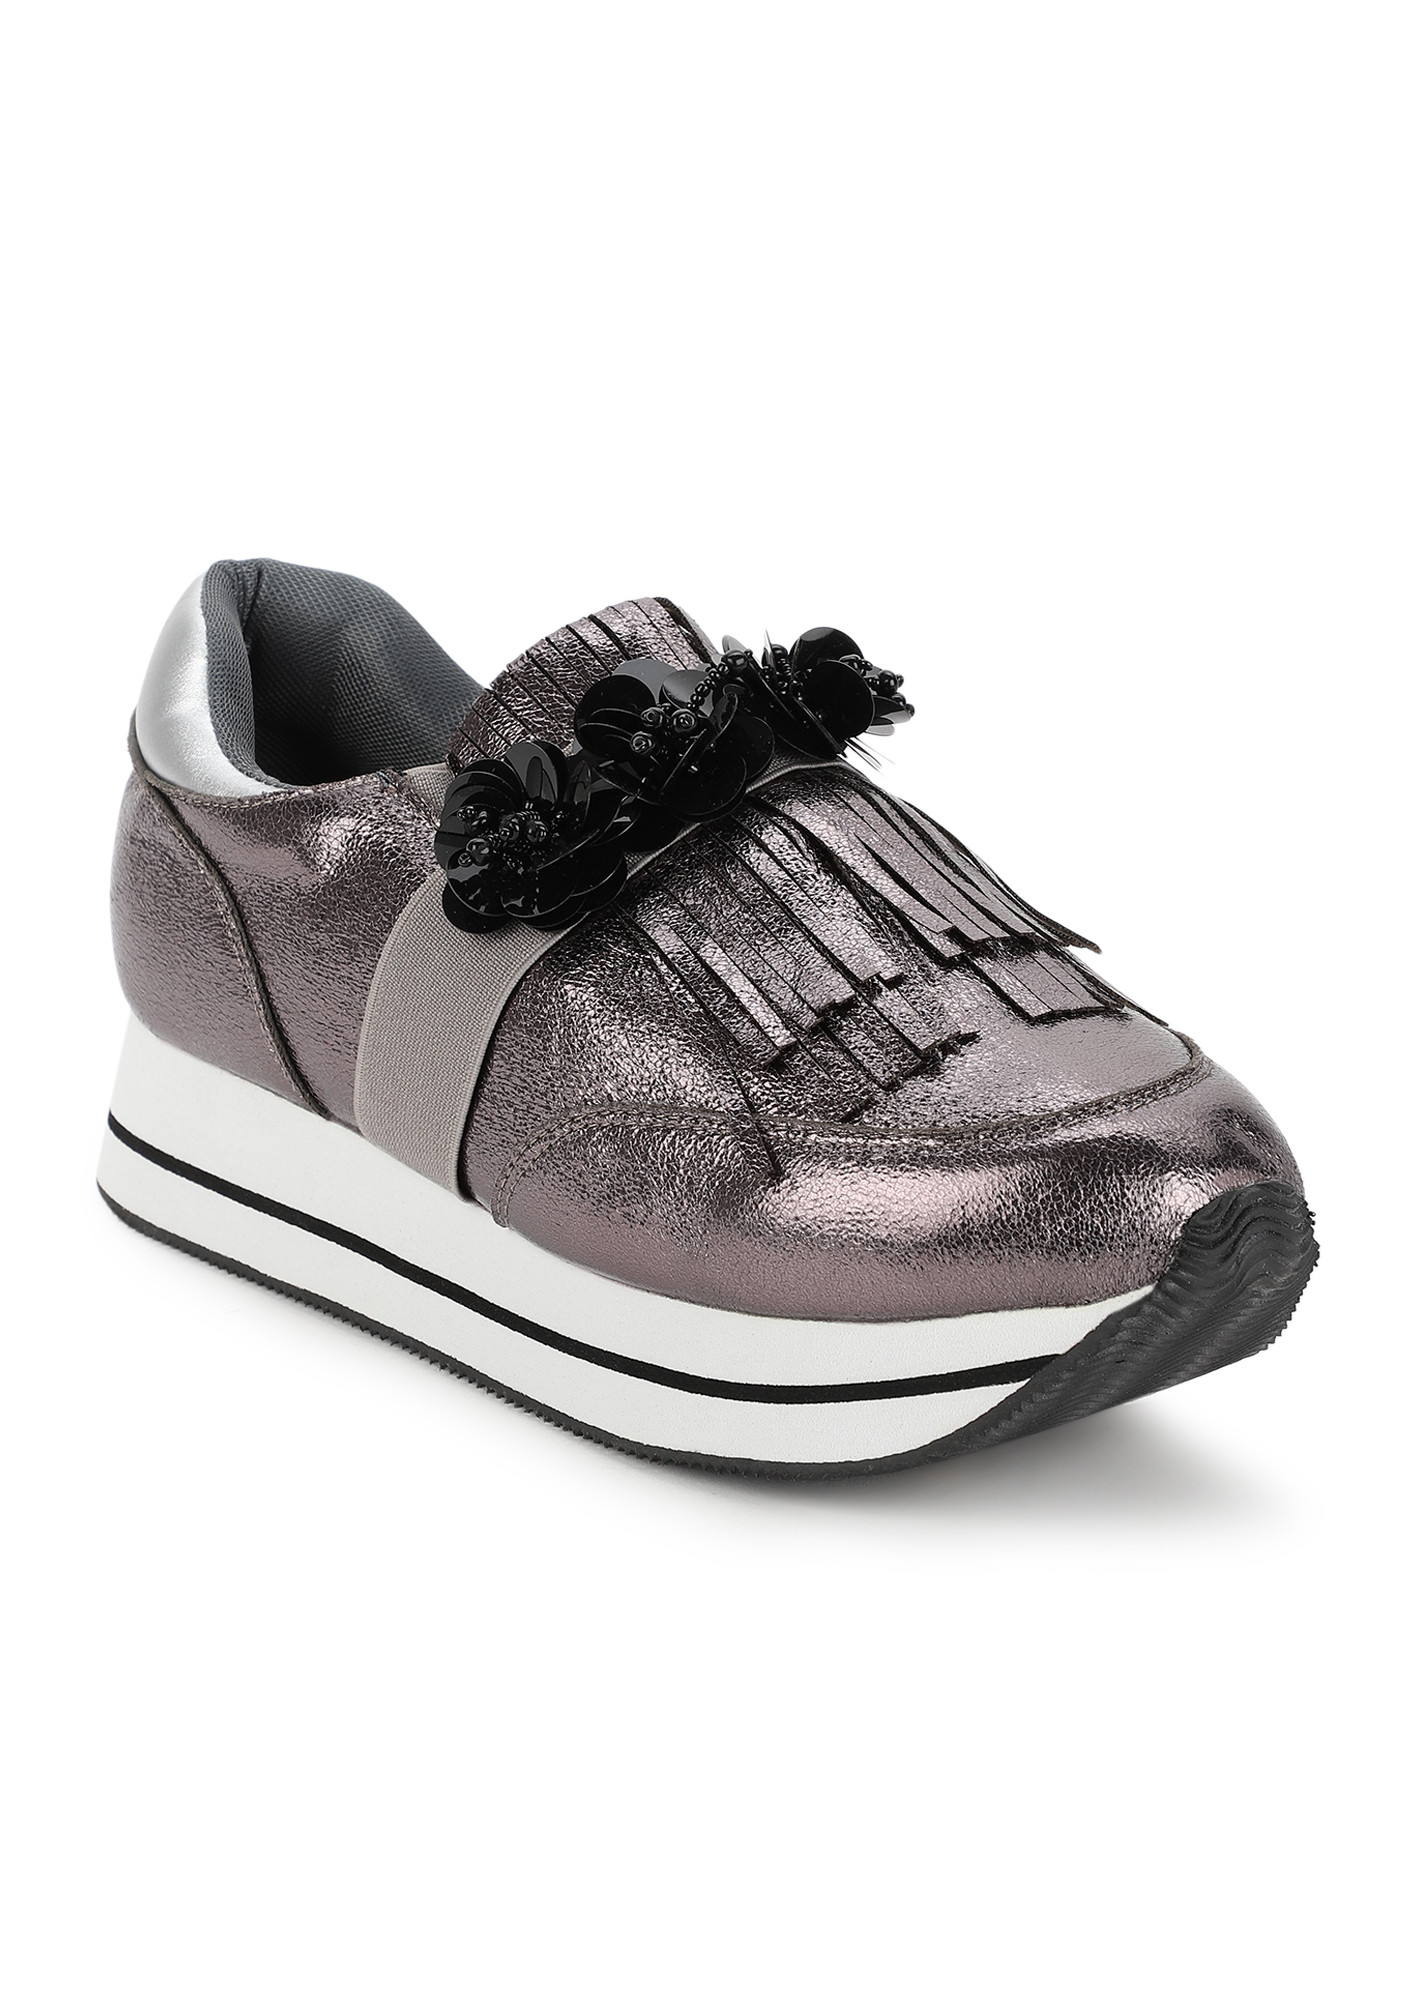 FLOWERS FOR MY FEET METALLIC CASUAL SHOES